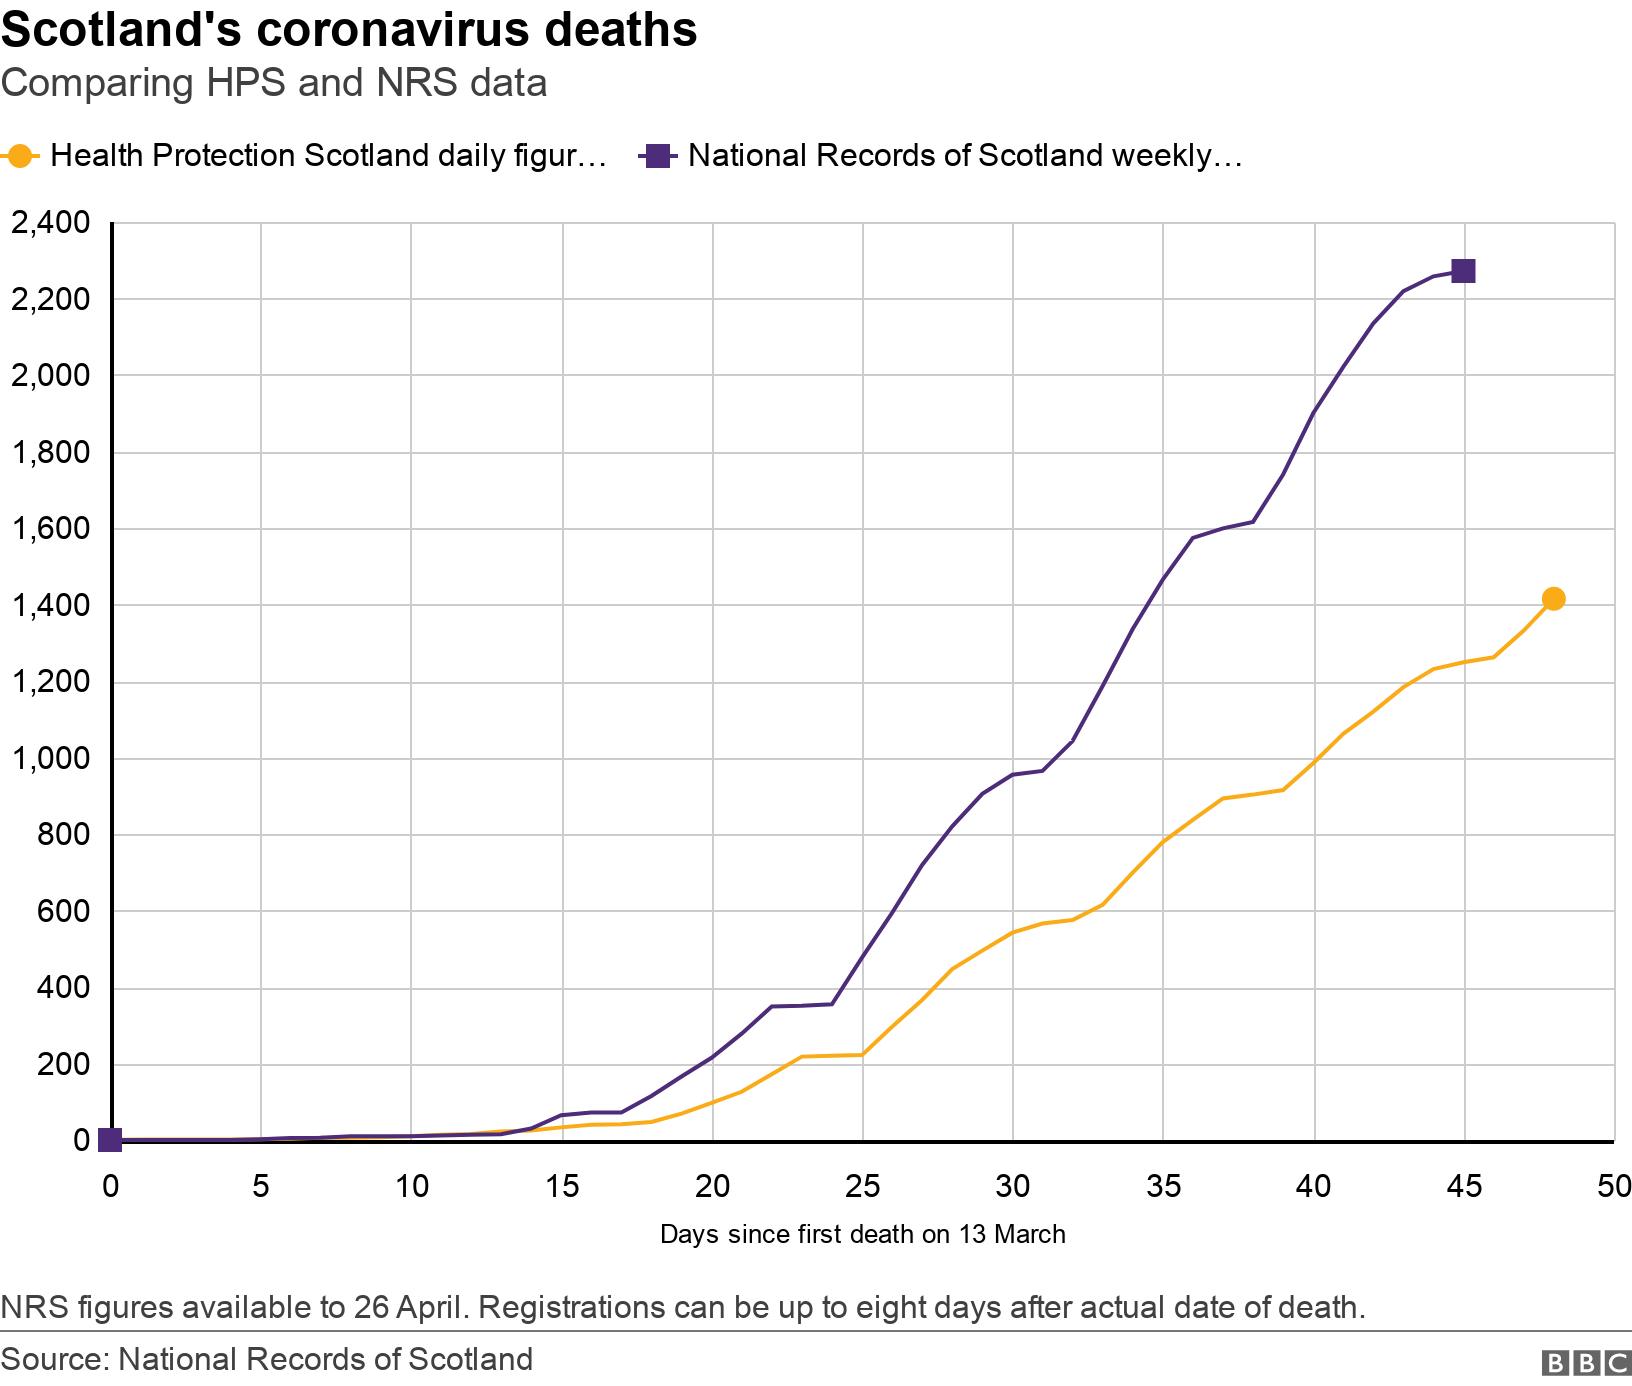 Scotland's coronavirus deaths. Comparing HPS and NRS data.  NRS figures available to 26 April. Registrations can be up to eight days after actual date of death..